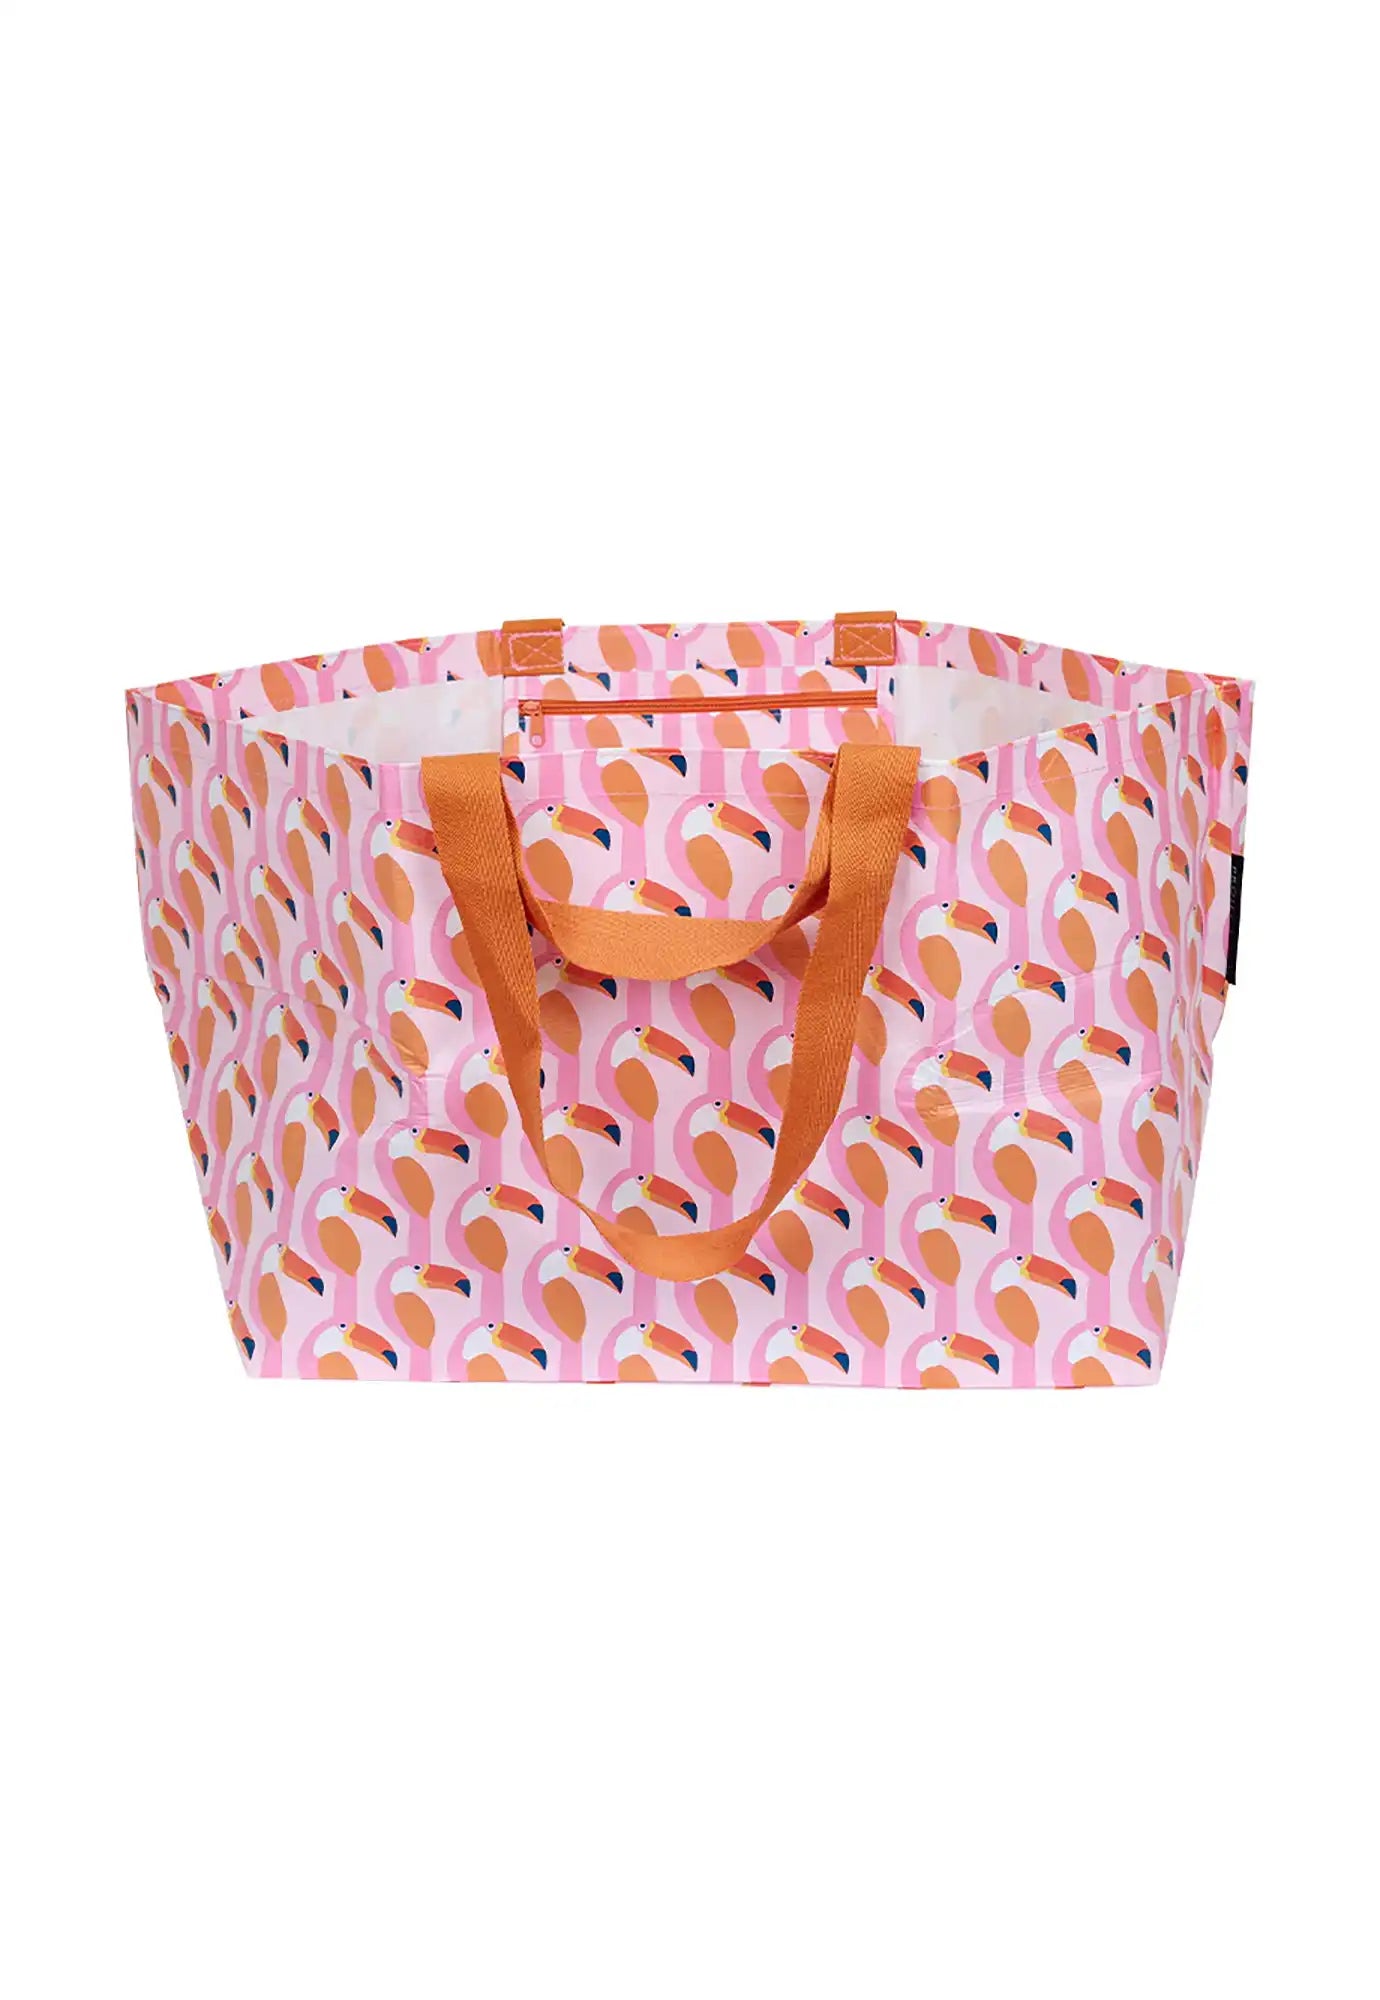 project ten - oversized tote